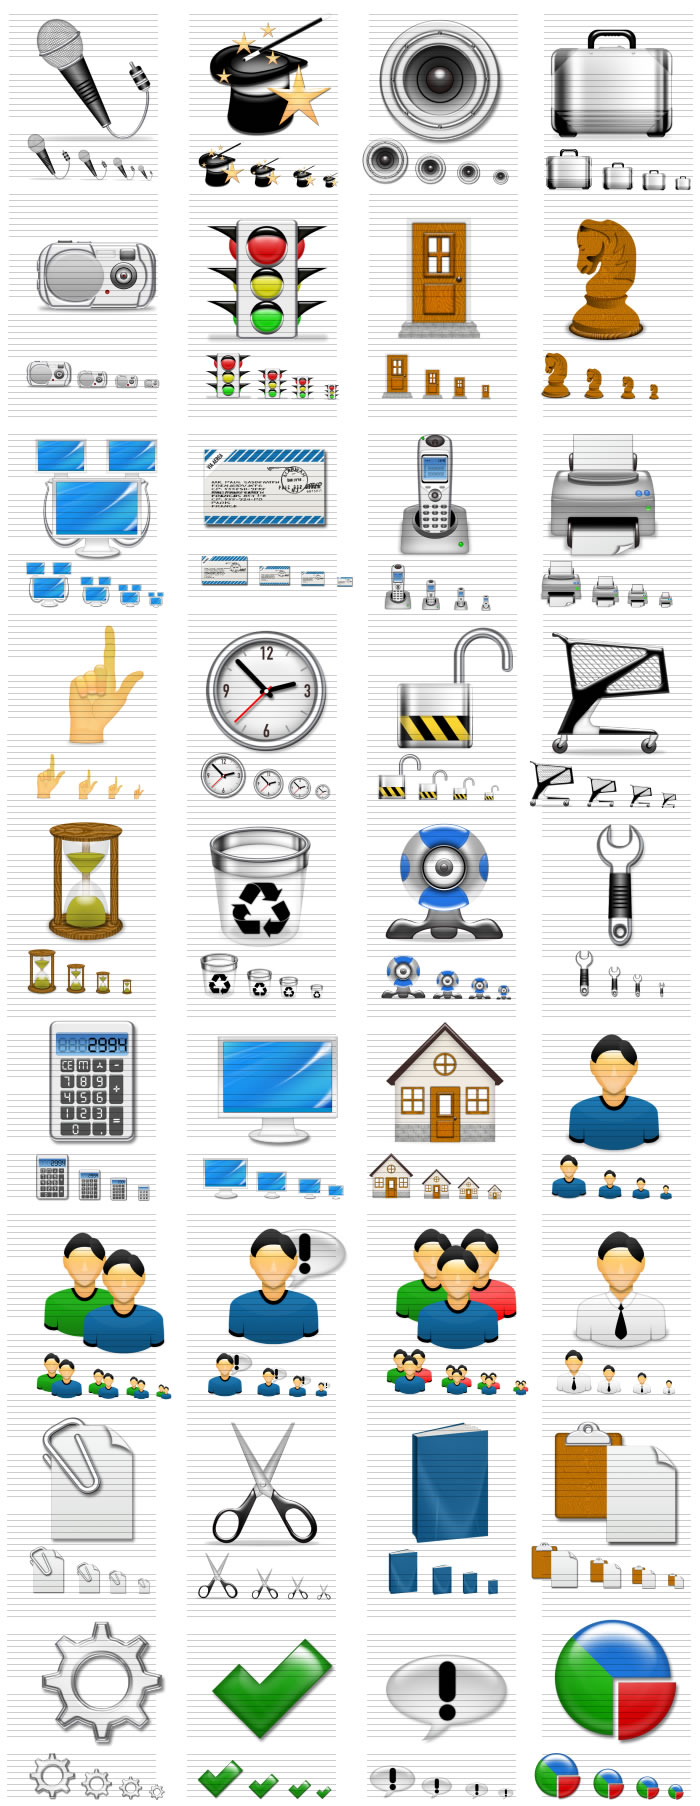 Iconshock Impressions - Professional icons for your software and web Screenshot